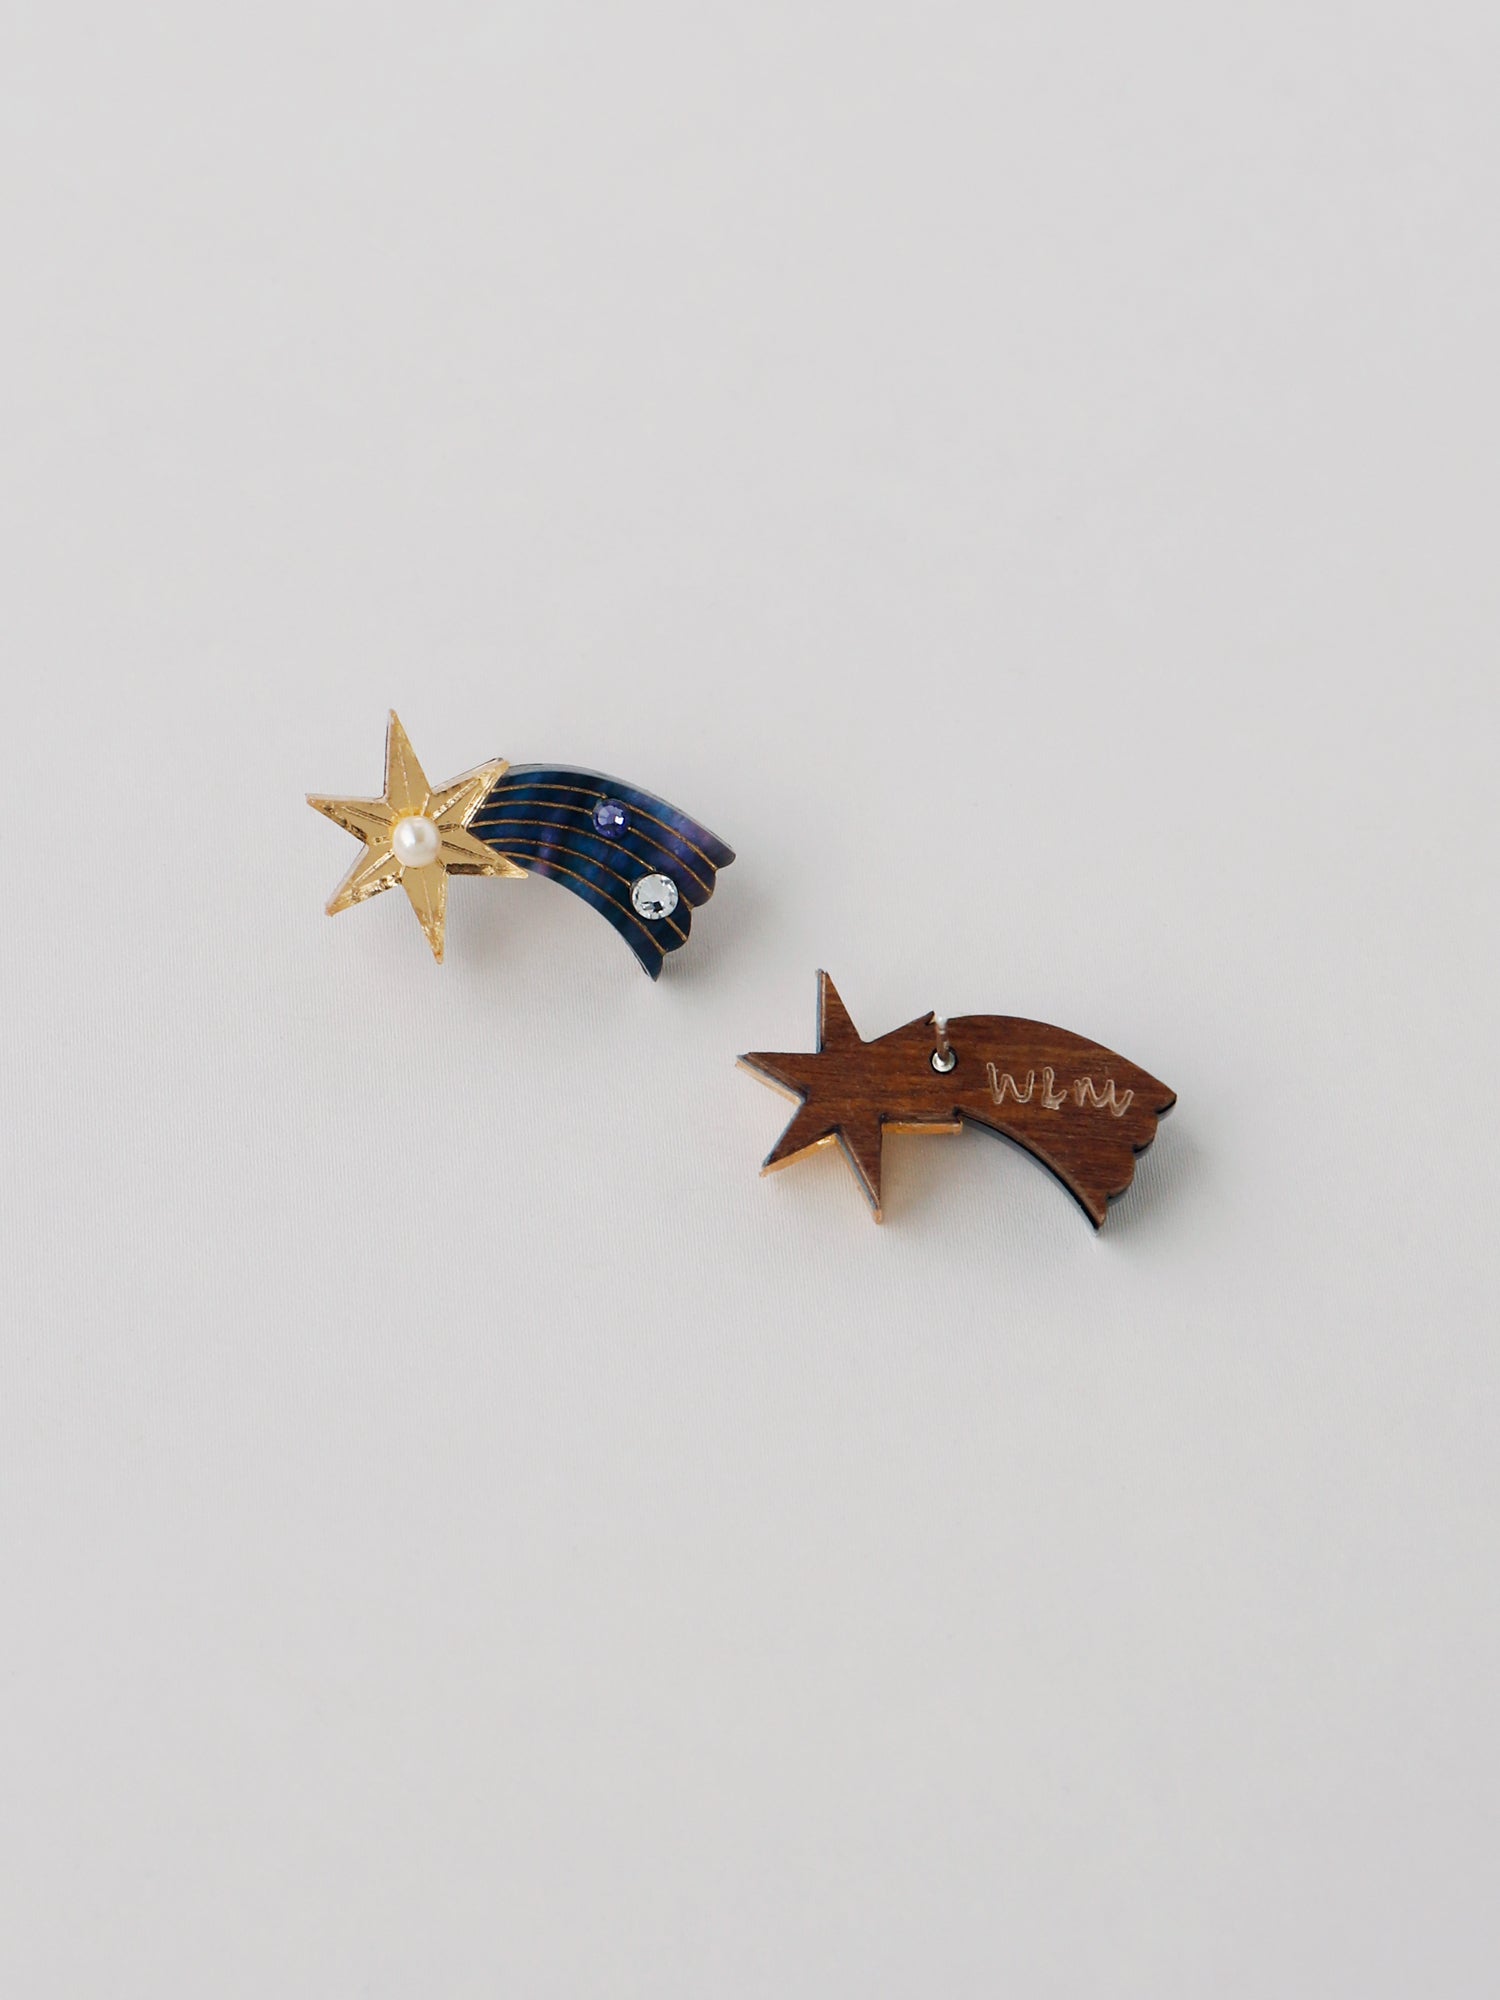 Shooting Star stud earrings made with laser cut deep blue acrylic, Czech glass pearls and hand inked details. Handmade in the UK by Wolf & Moon.